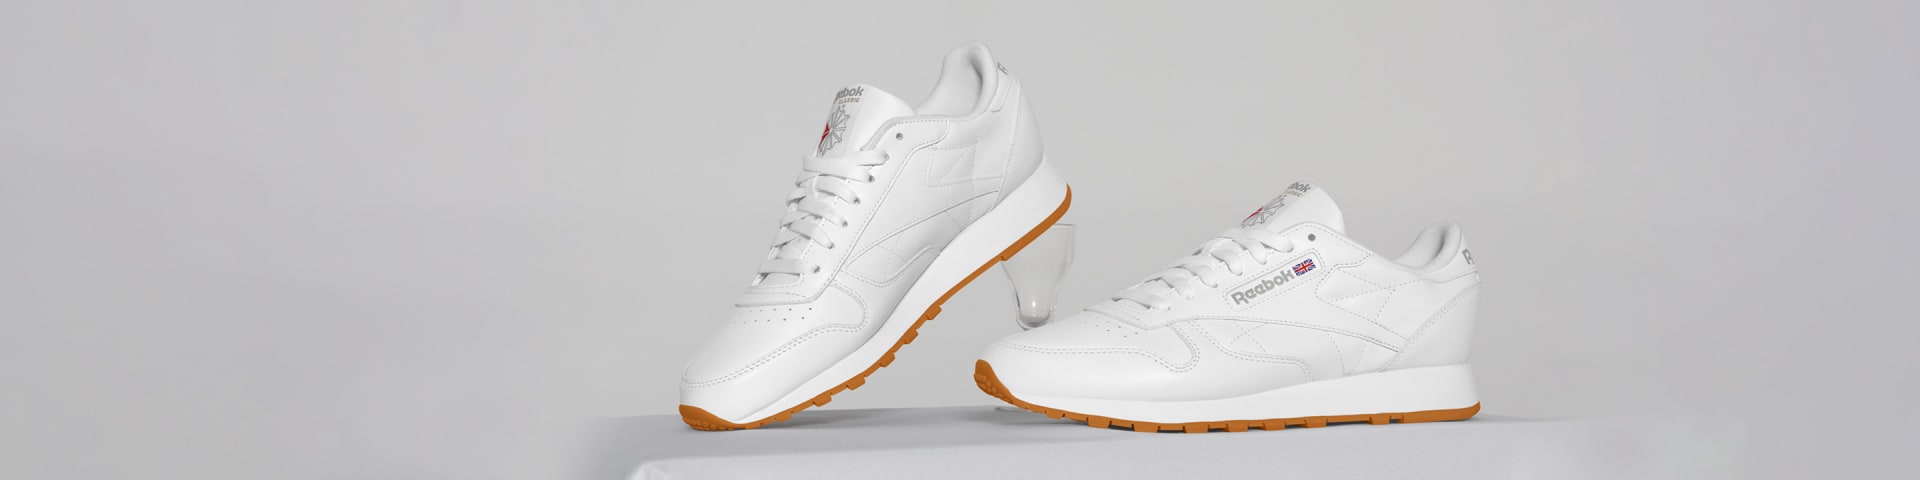 Women's Classic Leather Shoes | Reebok US